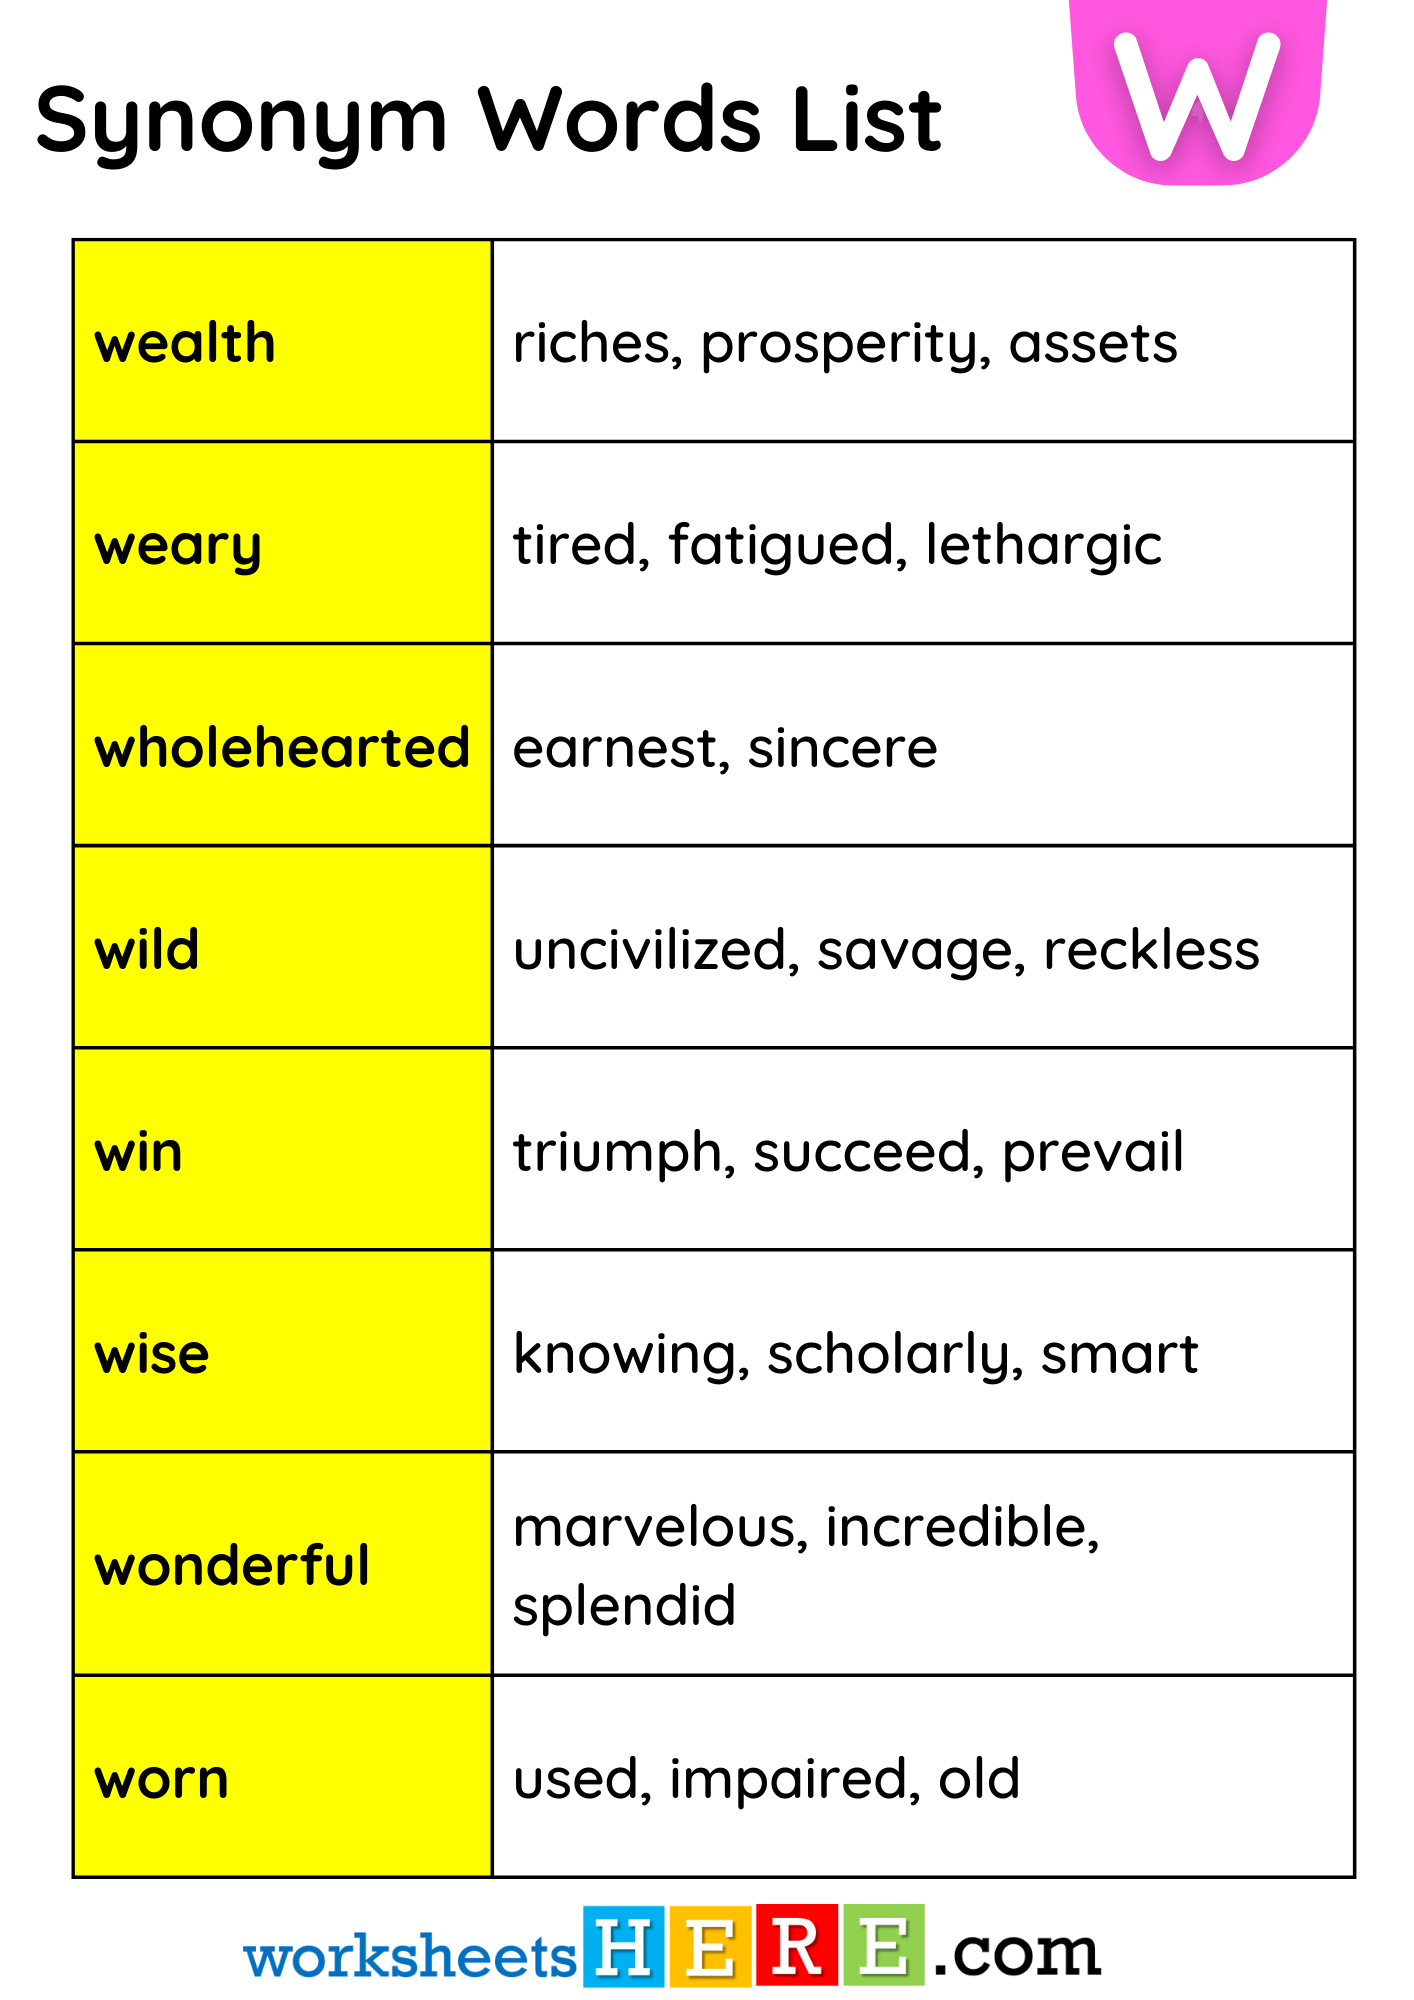 Synonym Words List Start with W Vocabulary PDF Worksheet For Students and Kids